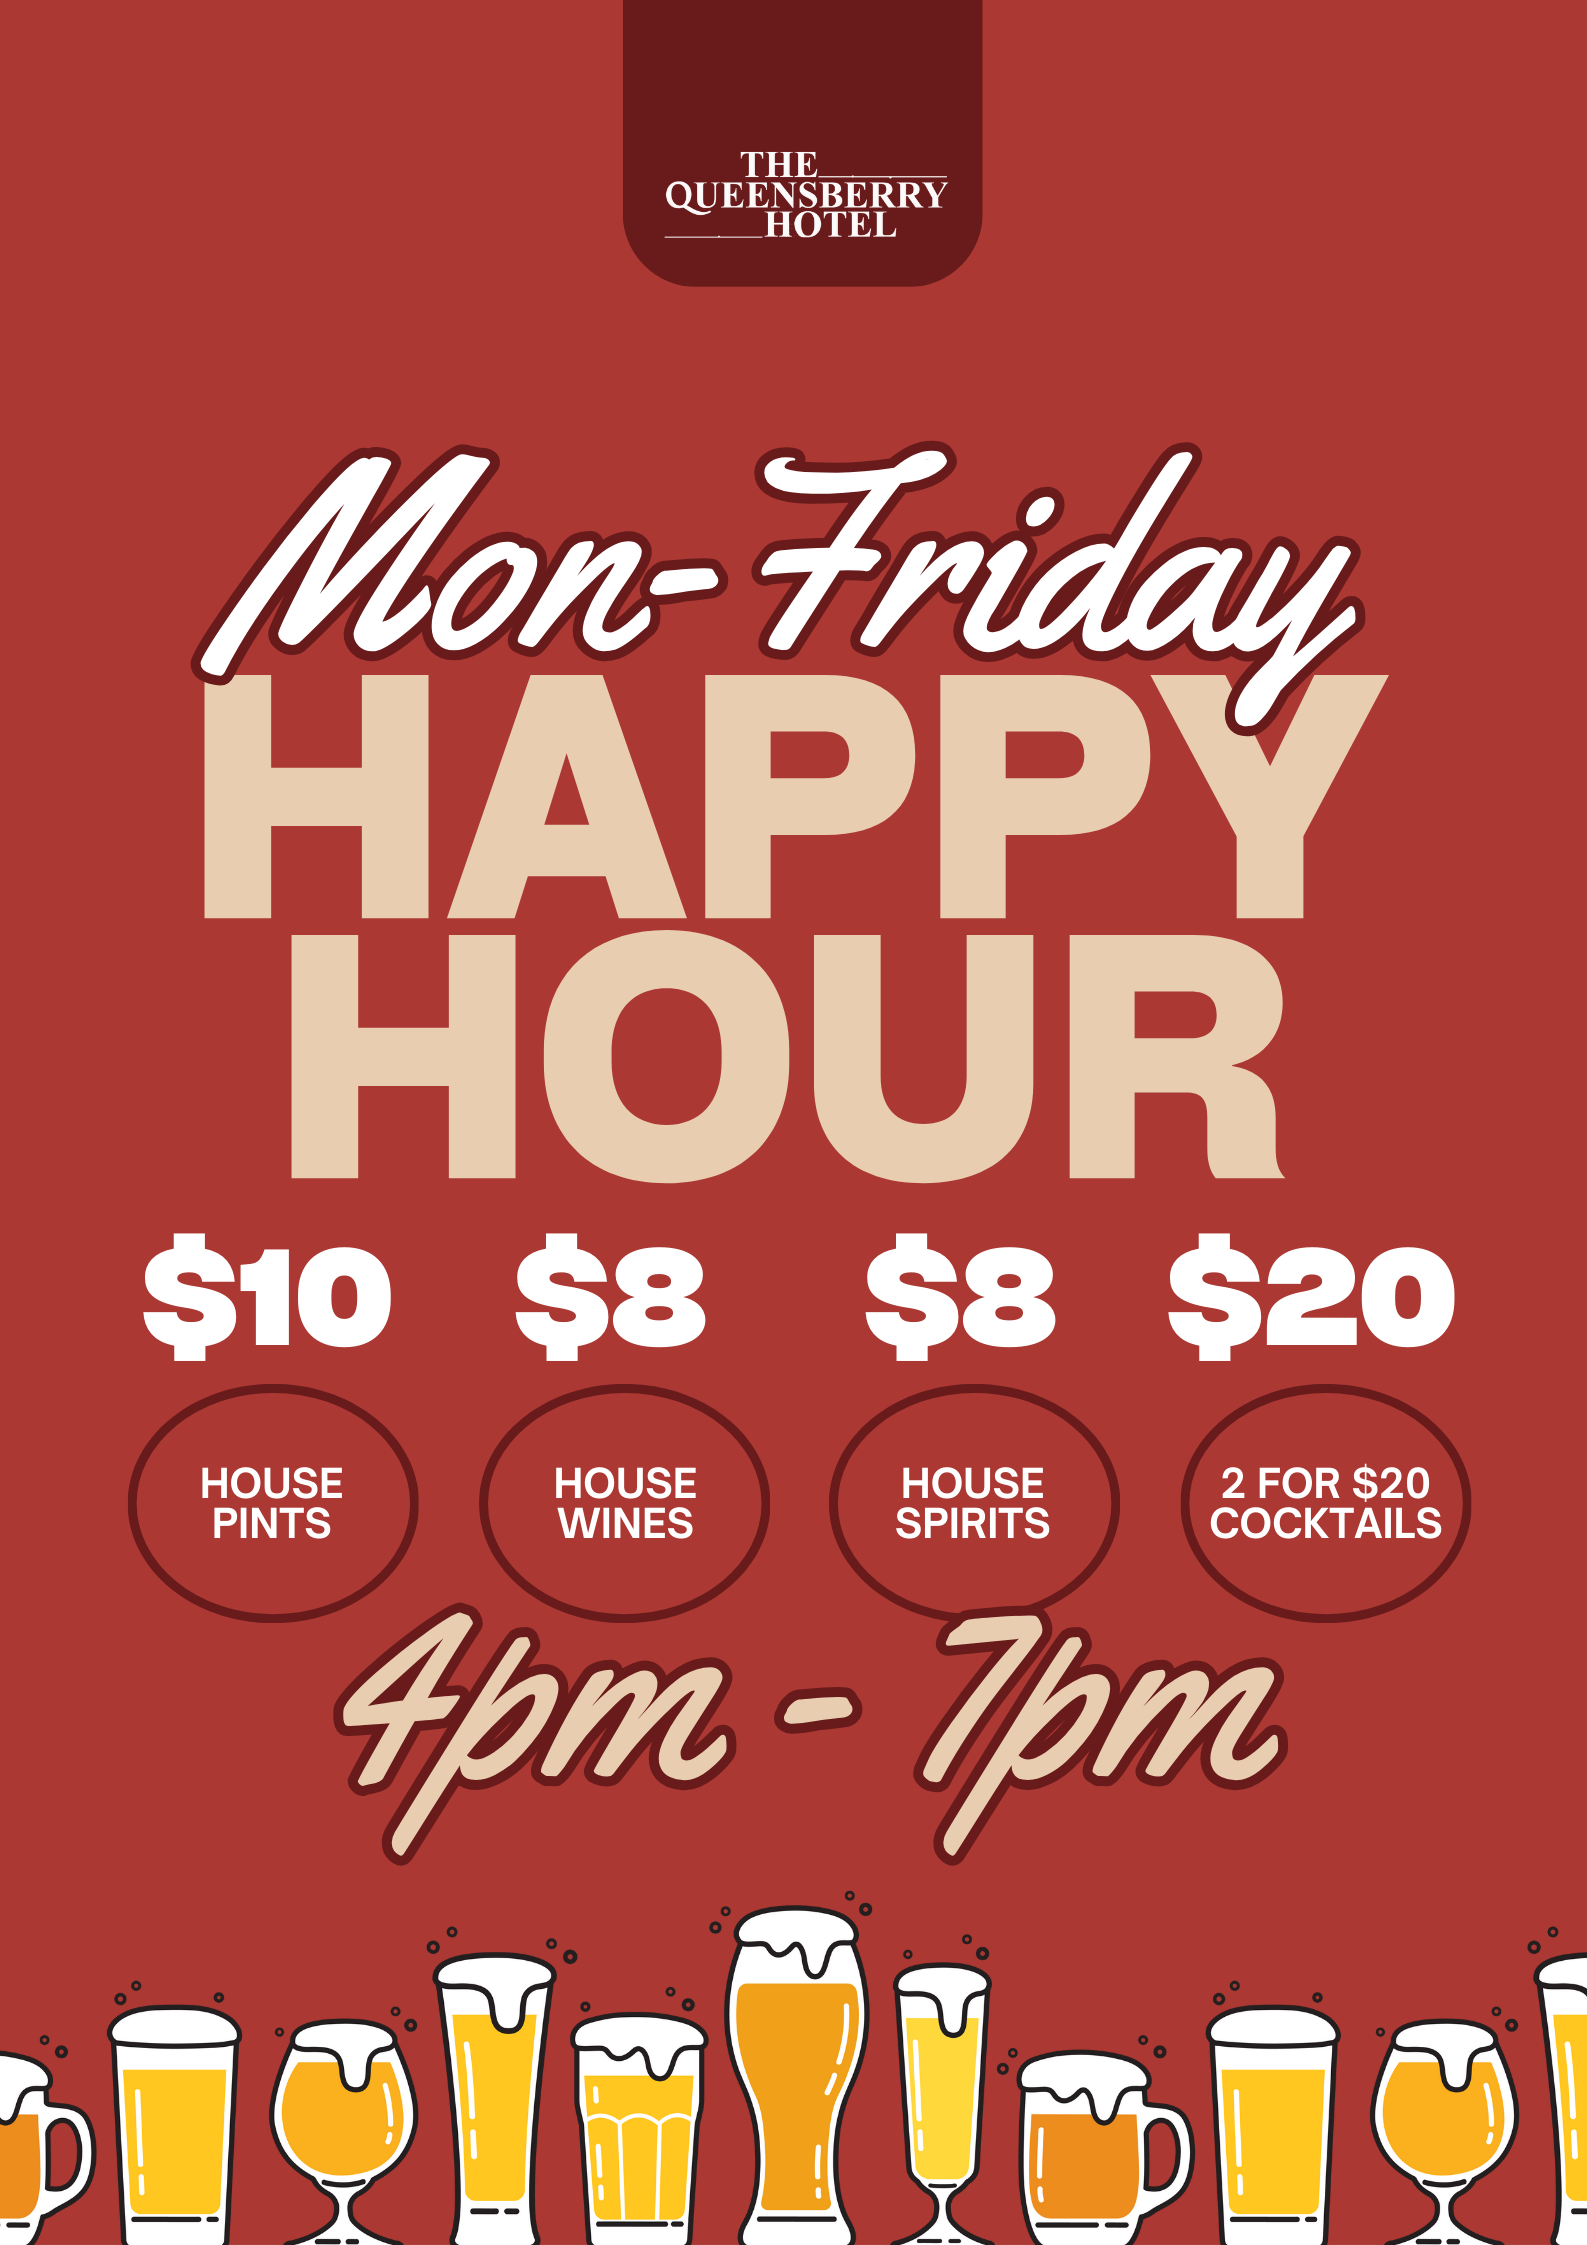 Happy Hour At Queensberry Hotel!